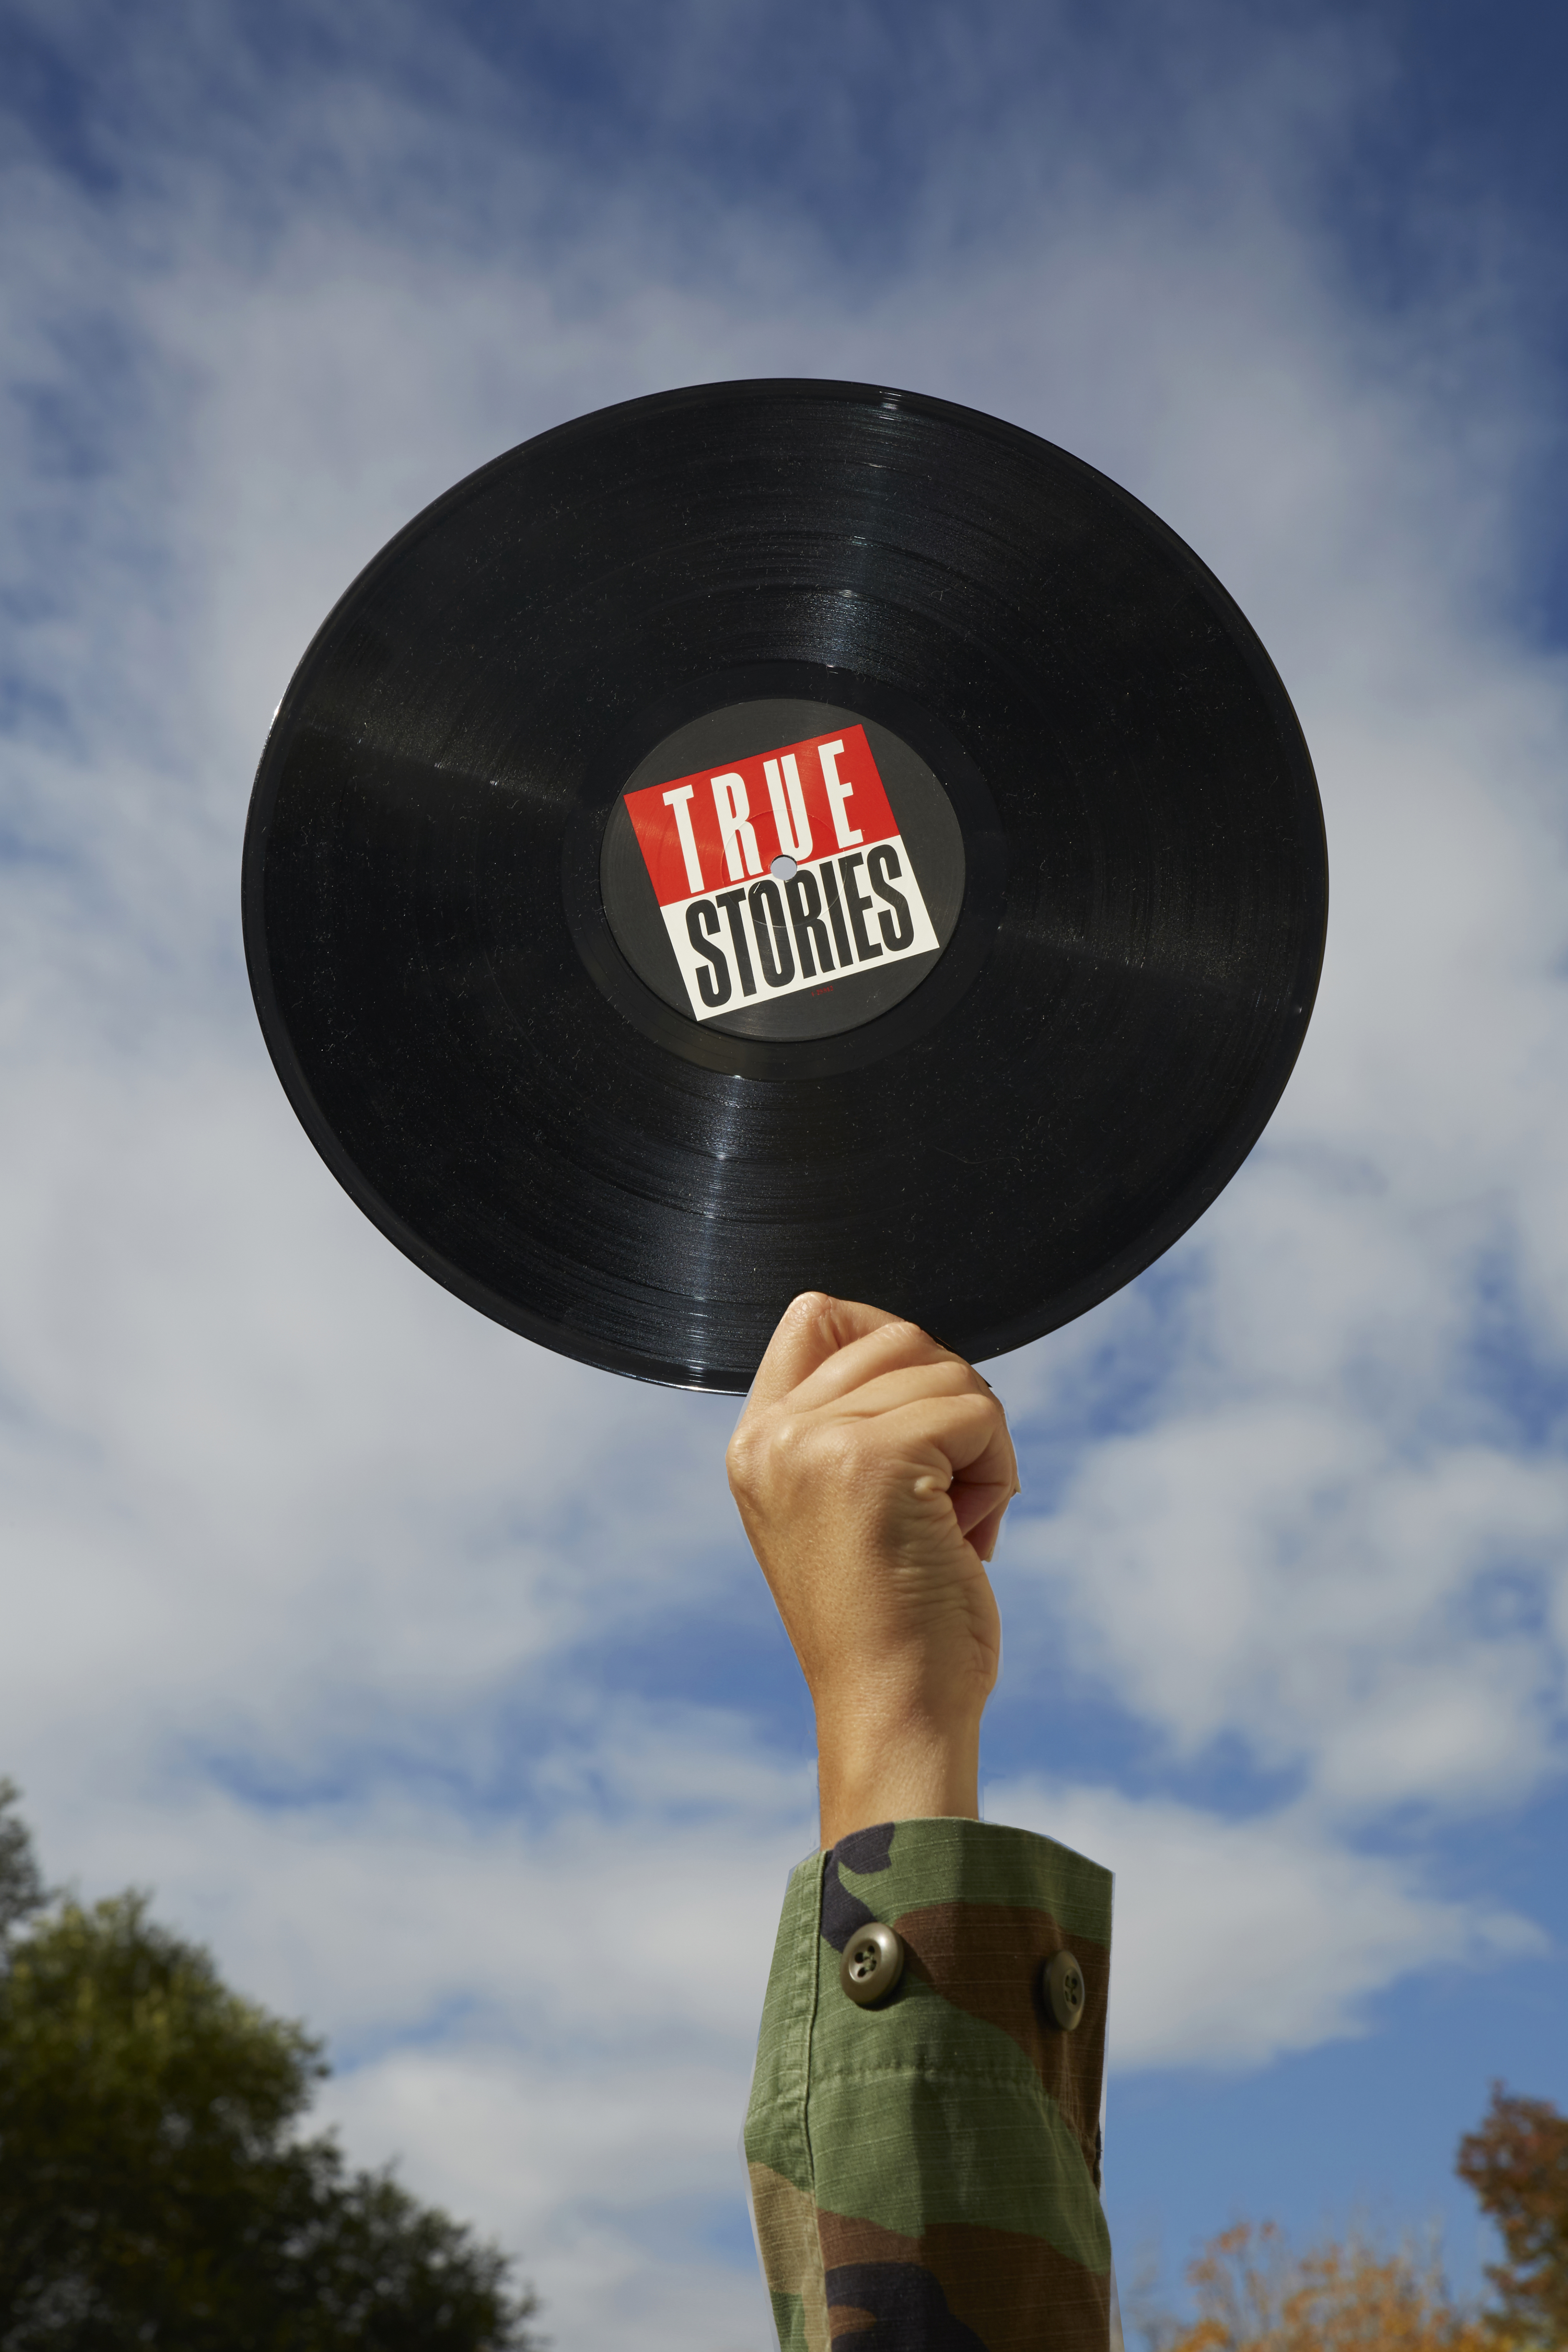 Introduction to Utah Stories’ History Issue: From Vinyl to Eccles